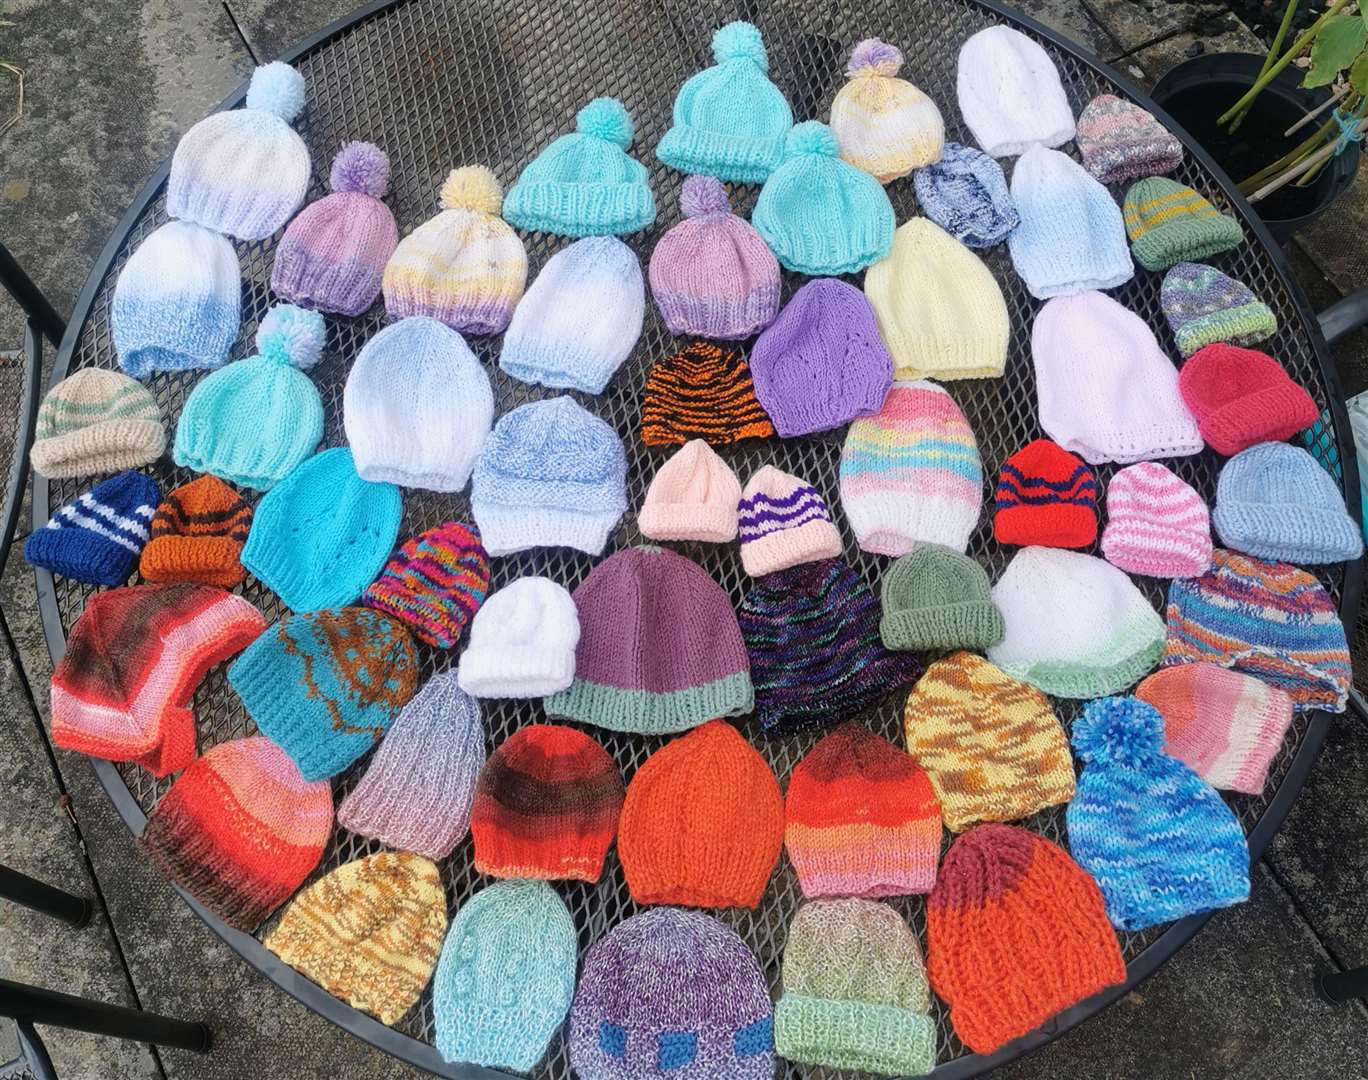 Hats knitted by John and his students for community midwives in Golspie during lockdown.